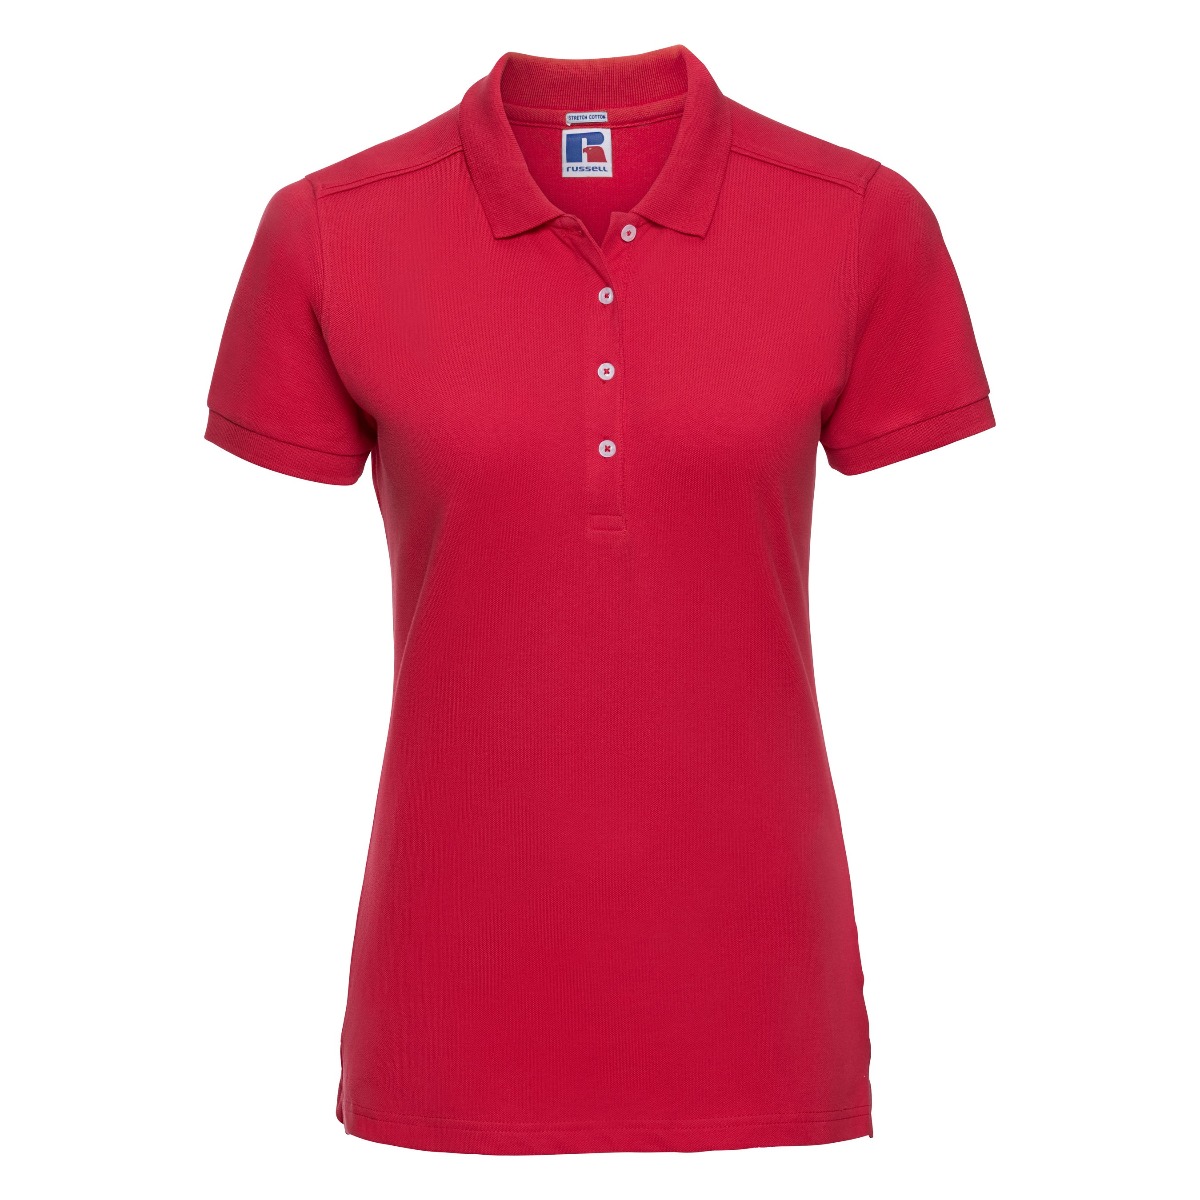 ax-httpswebsystems.s3.amazonaws.comtmp_for_downloadrussell-womens-stretch-classic-red_5.jpg